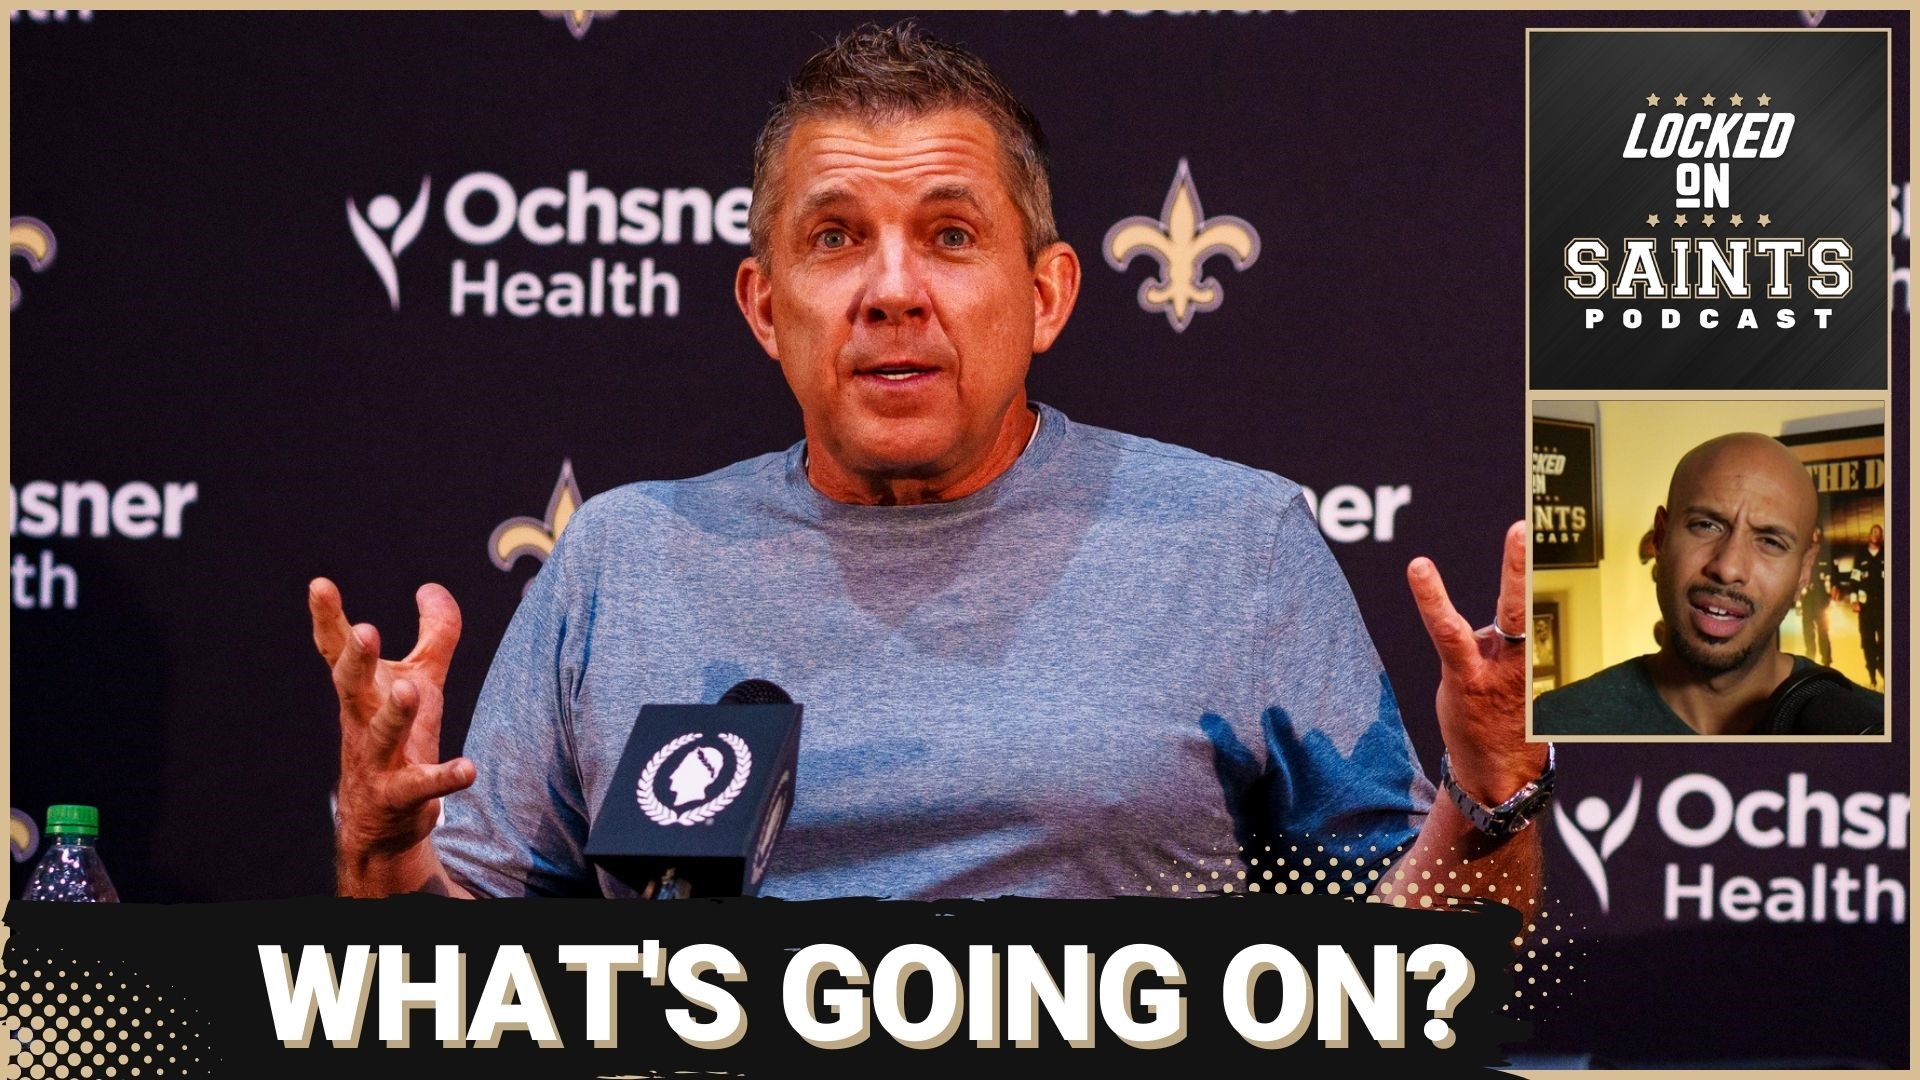 It's starting to look like former New Orleans Saints head coach Sean Payton doesn't have the option in the hiring circle many of us thought.